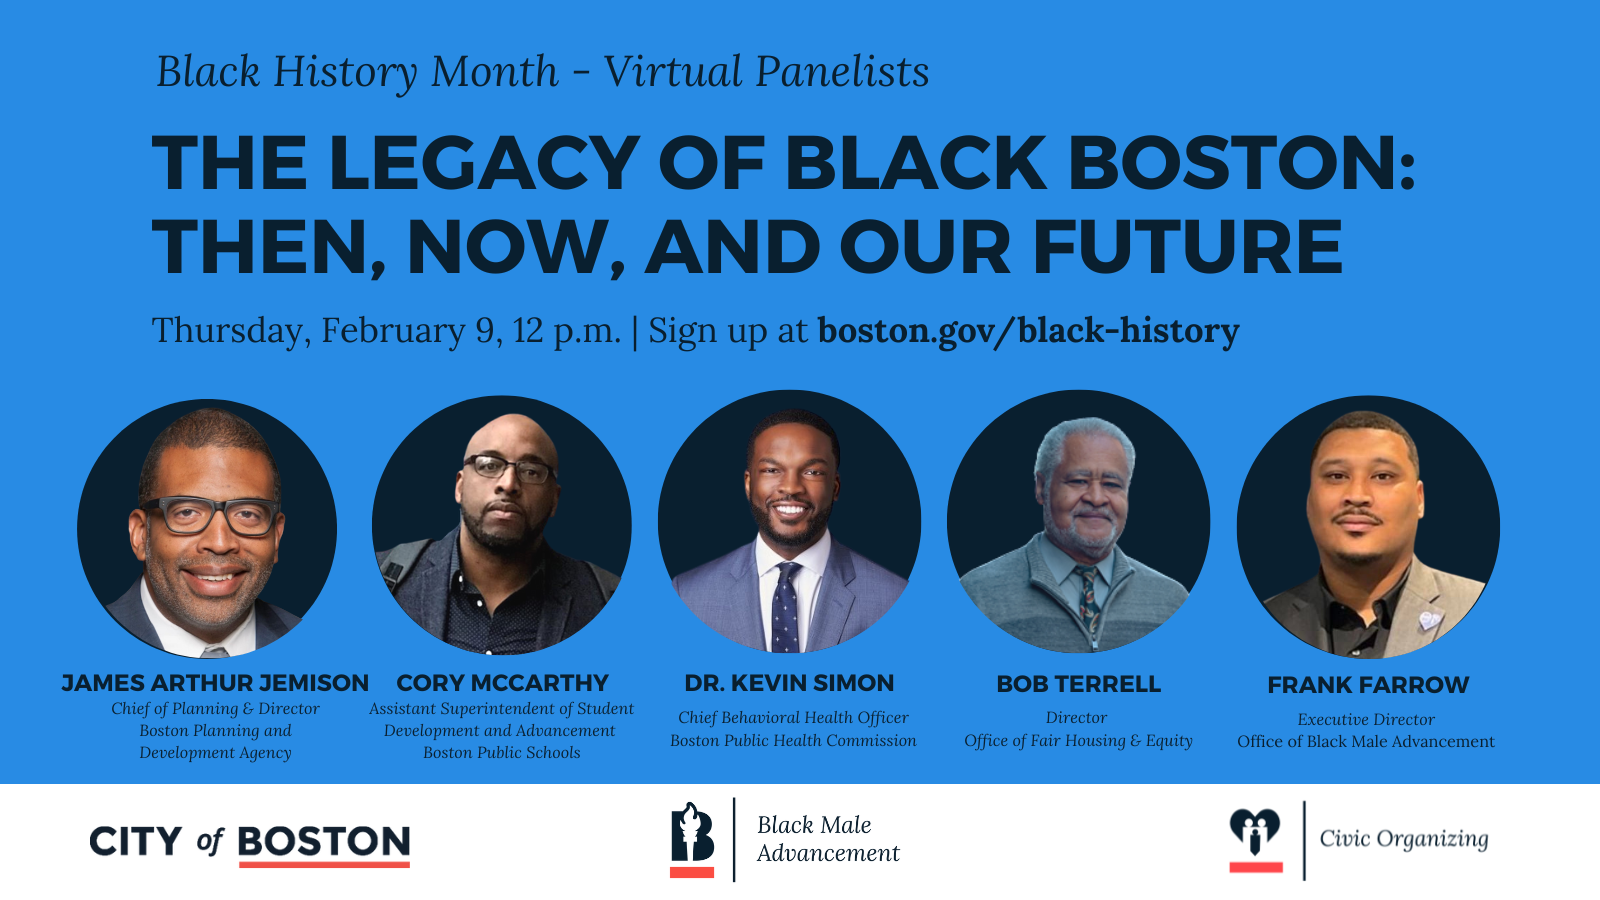 The Legacy of Black Boston: Then, Now, and our Future. Black History Month - Virtual Panel. Thursday, February 9, 12:00 PM. Introducing our panelists: Bob Terrell, Director of the Office of Fair Housing & Equity; James Arthur Jemison, Chief of Planning & Director of the BPDA; Cory McCarthy, Assistant Superintendent of Student Development and Advancement at Boston Public Schools; Dr. Kevin Simon, Chief Behavioral Health Officer Boston Public Health Commission; and Frank Farrow, our moderator, Executive Director of the Office of Black Male Advancement. 